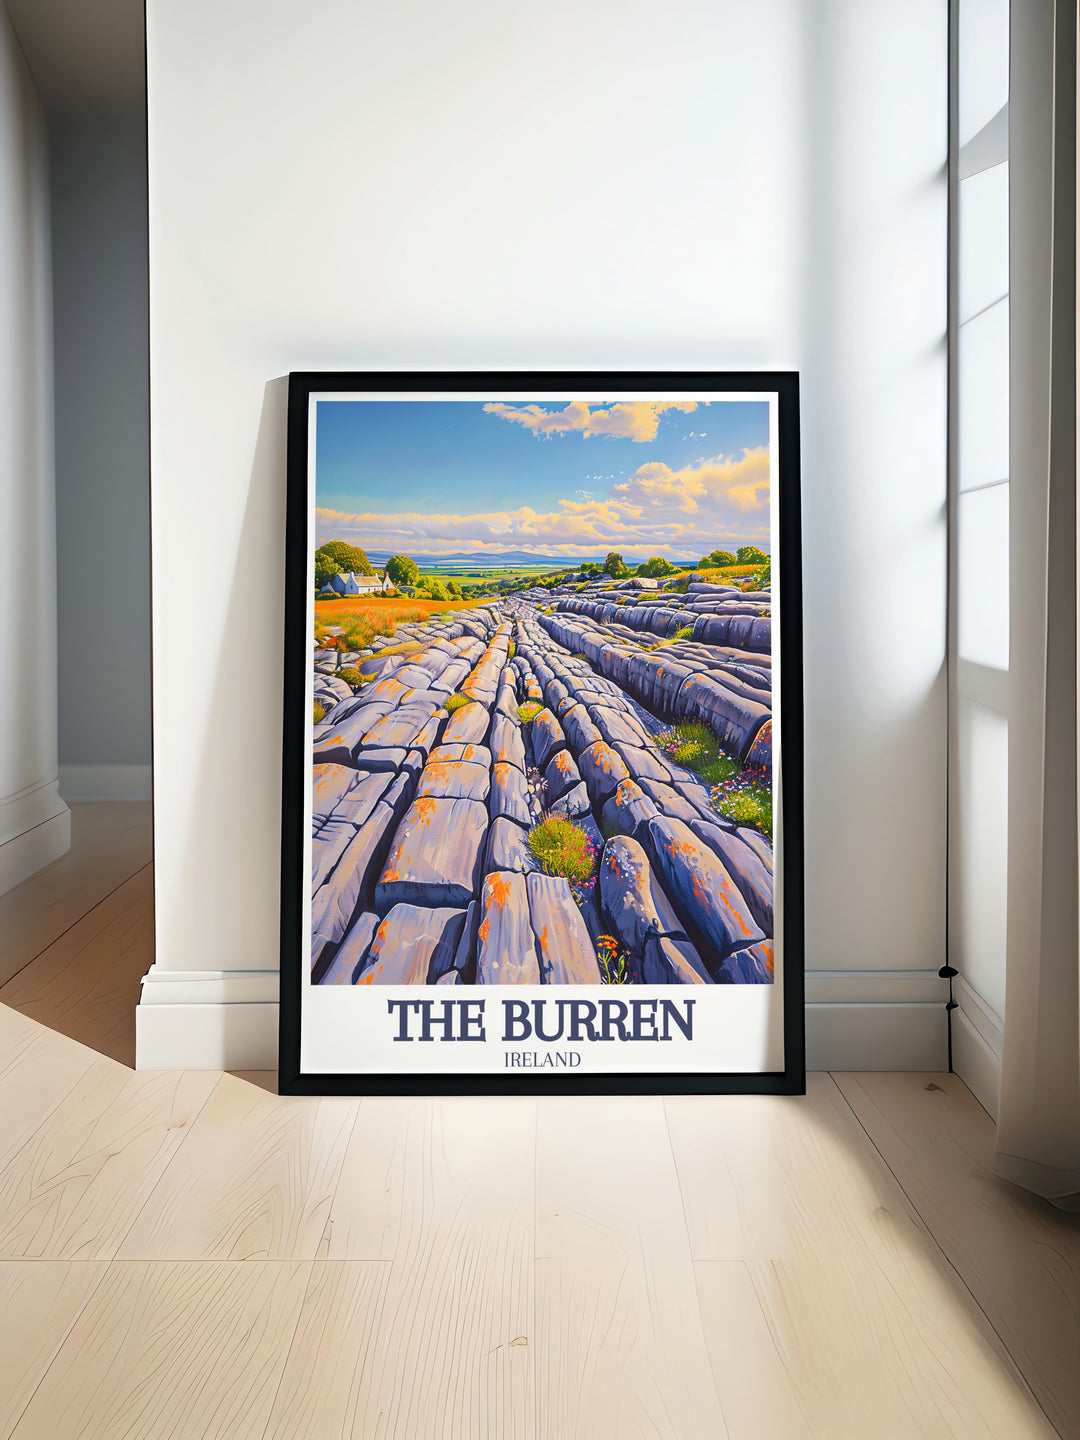 Stunning art print of Burren National Park Kilfenora village in County Clare showcasing the natural beauty of Irelands rugged landscape perfect for wall decor and a thoughtful gift